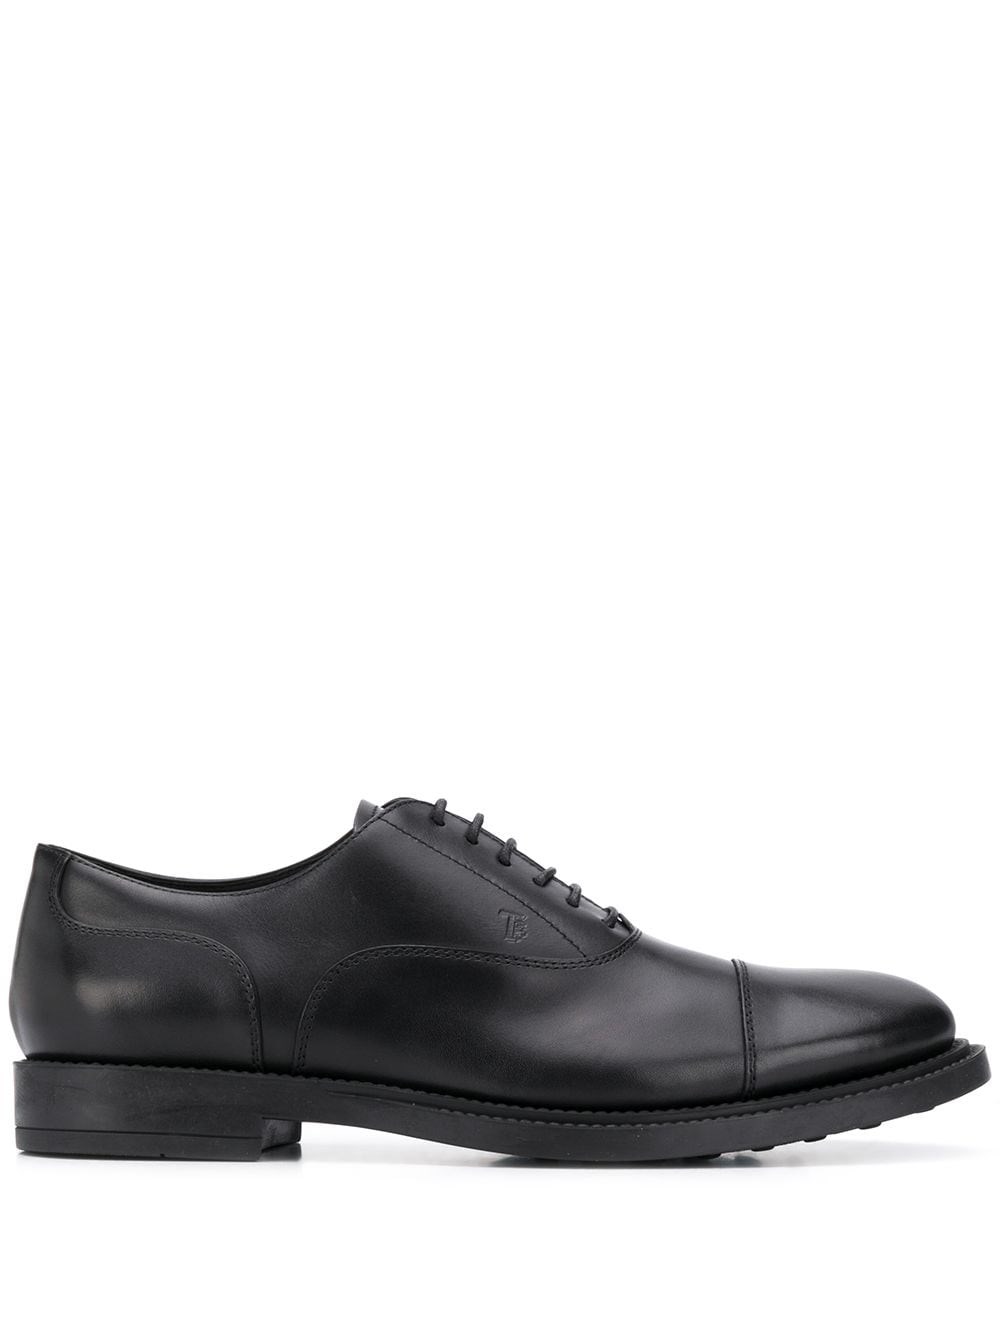 Tod's Brogues Shoes In Black